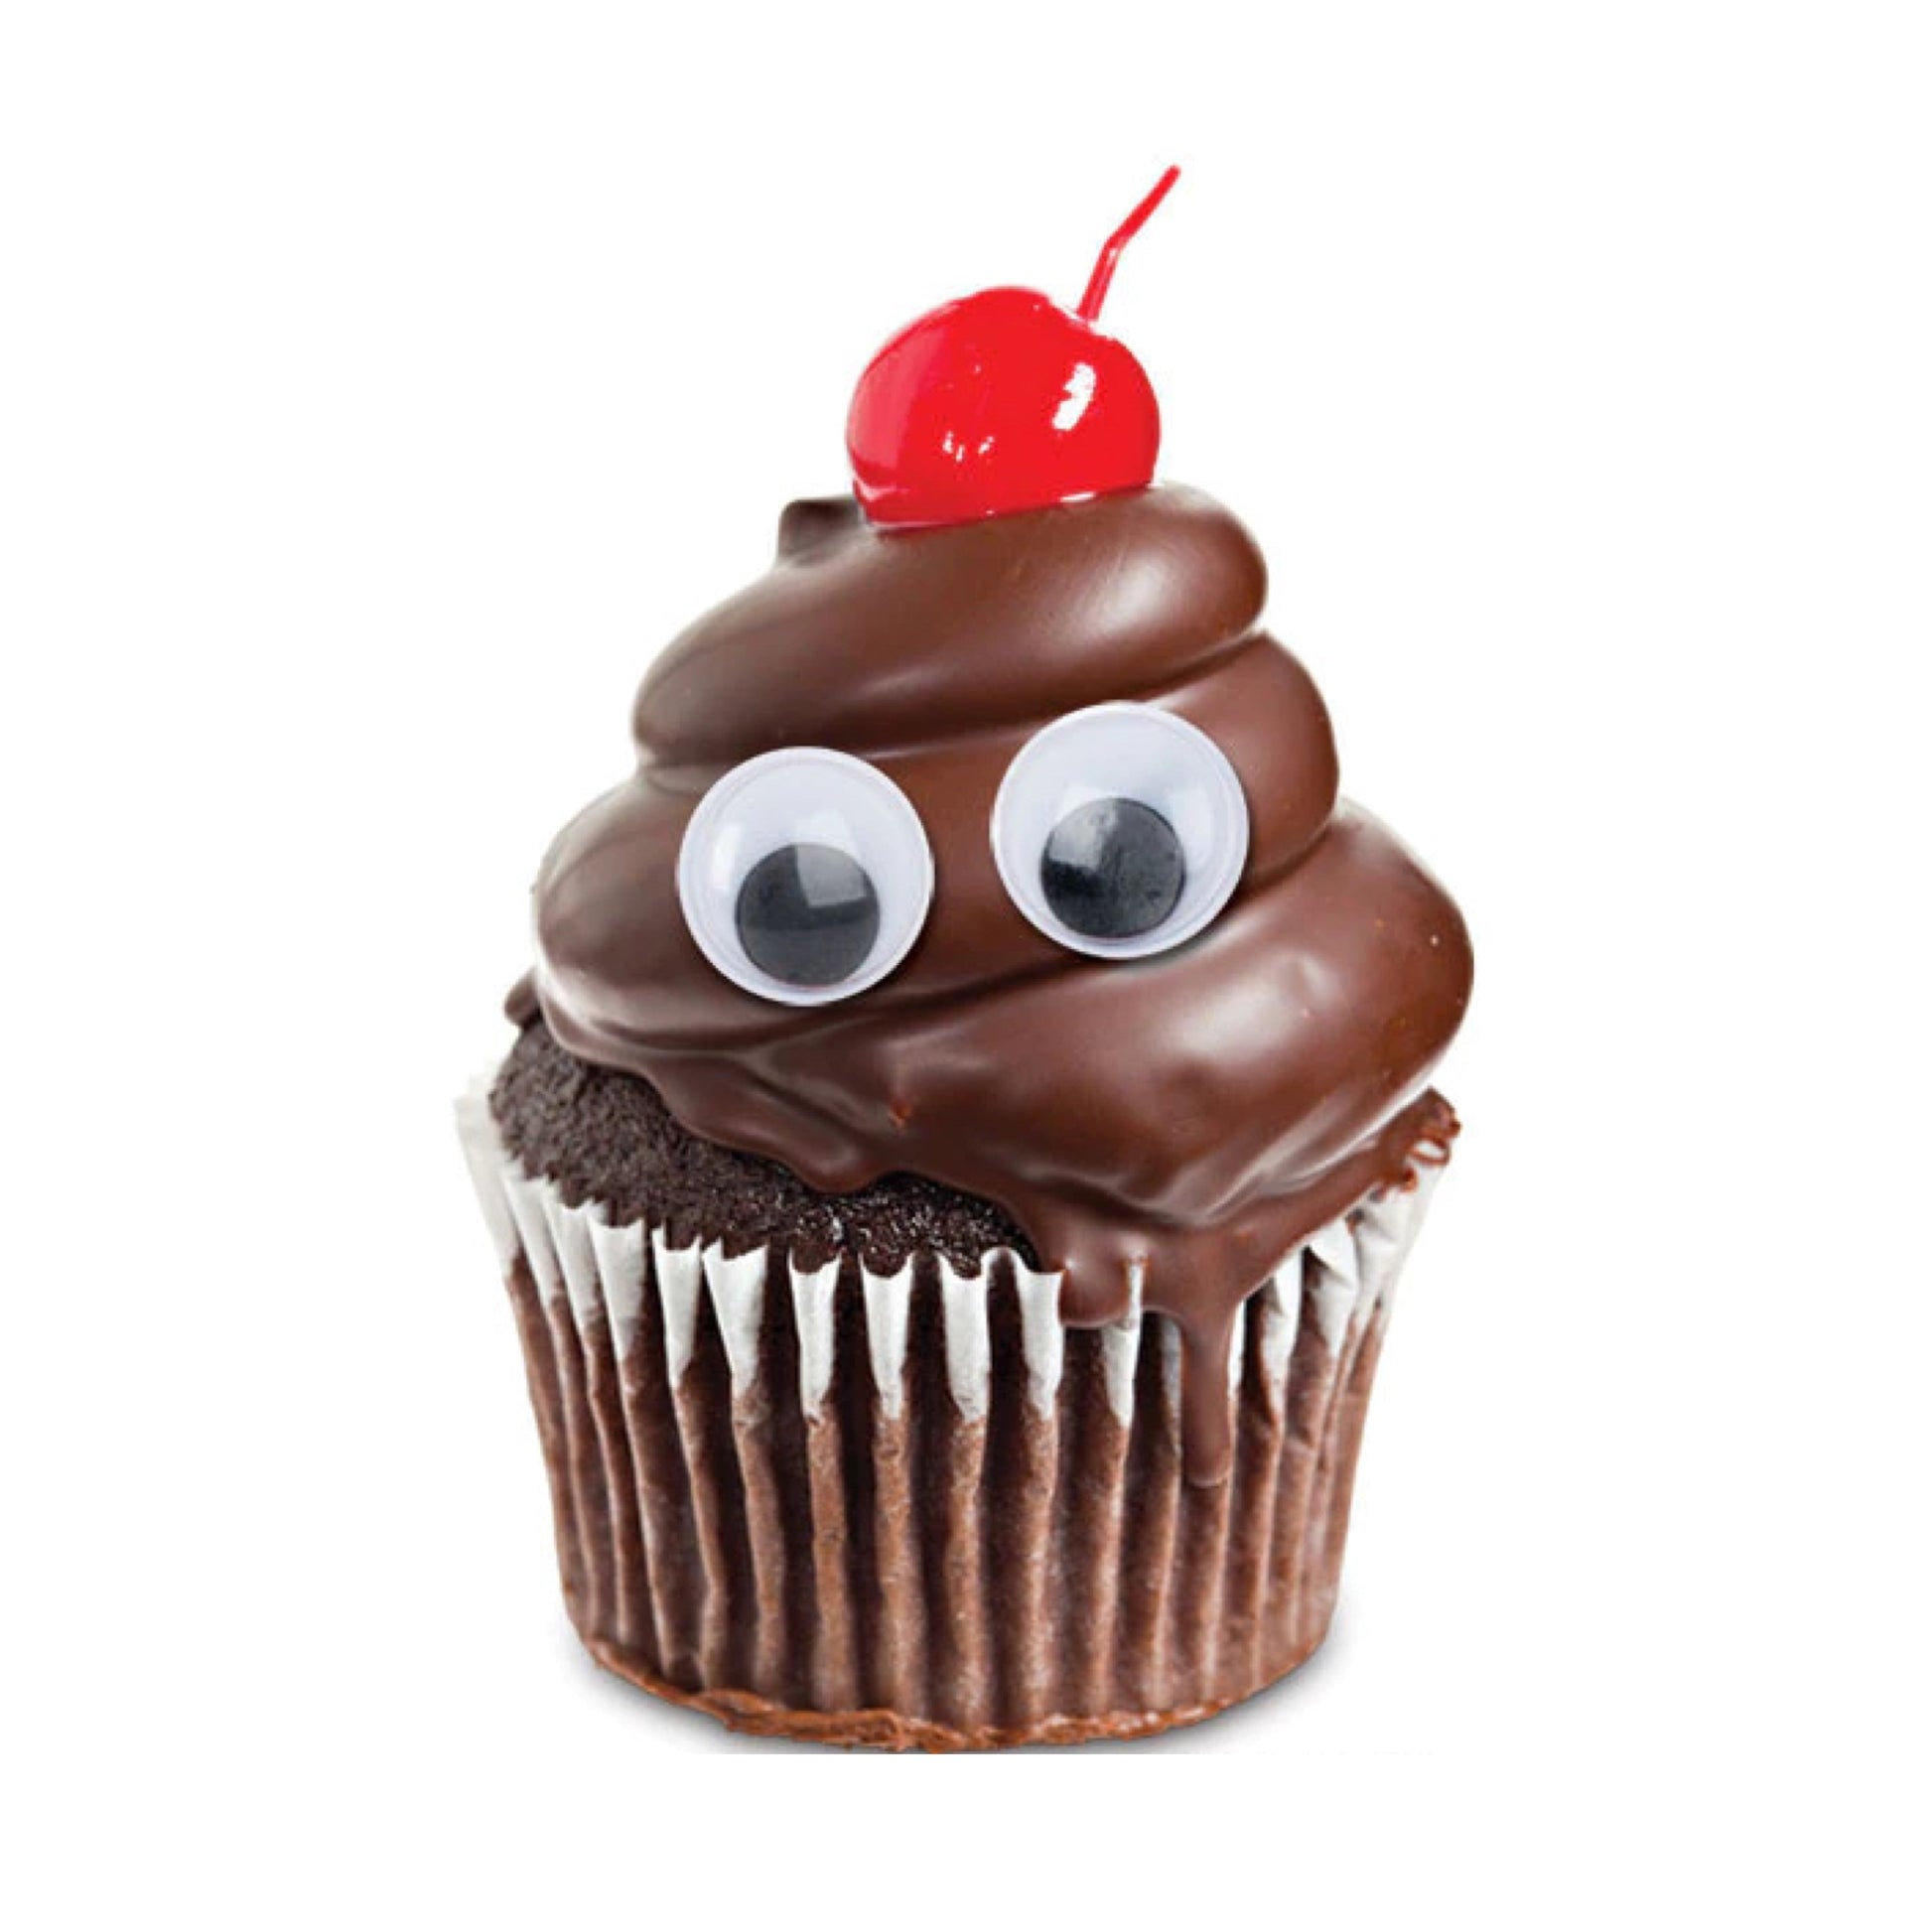 A pair of emergency googly eyes stuck on a chocolate cupcake with a red cherry on the top